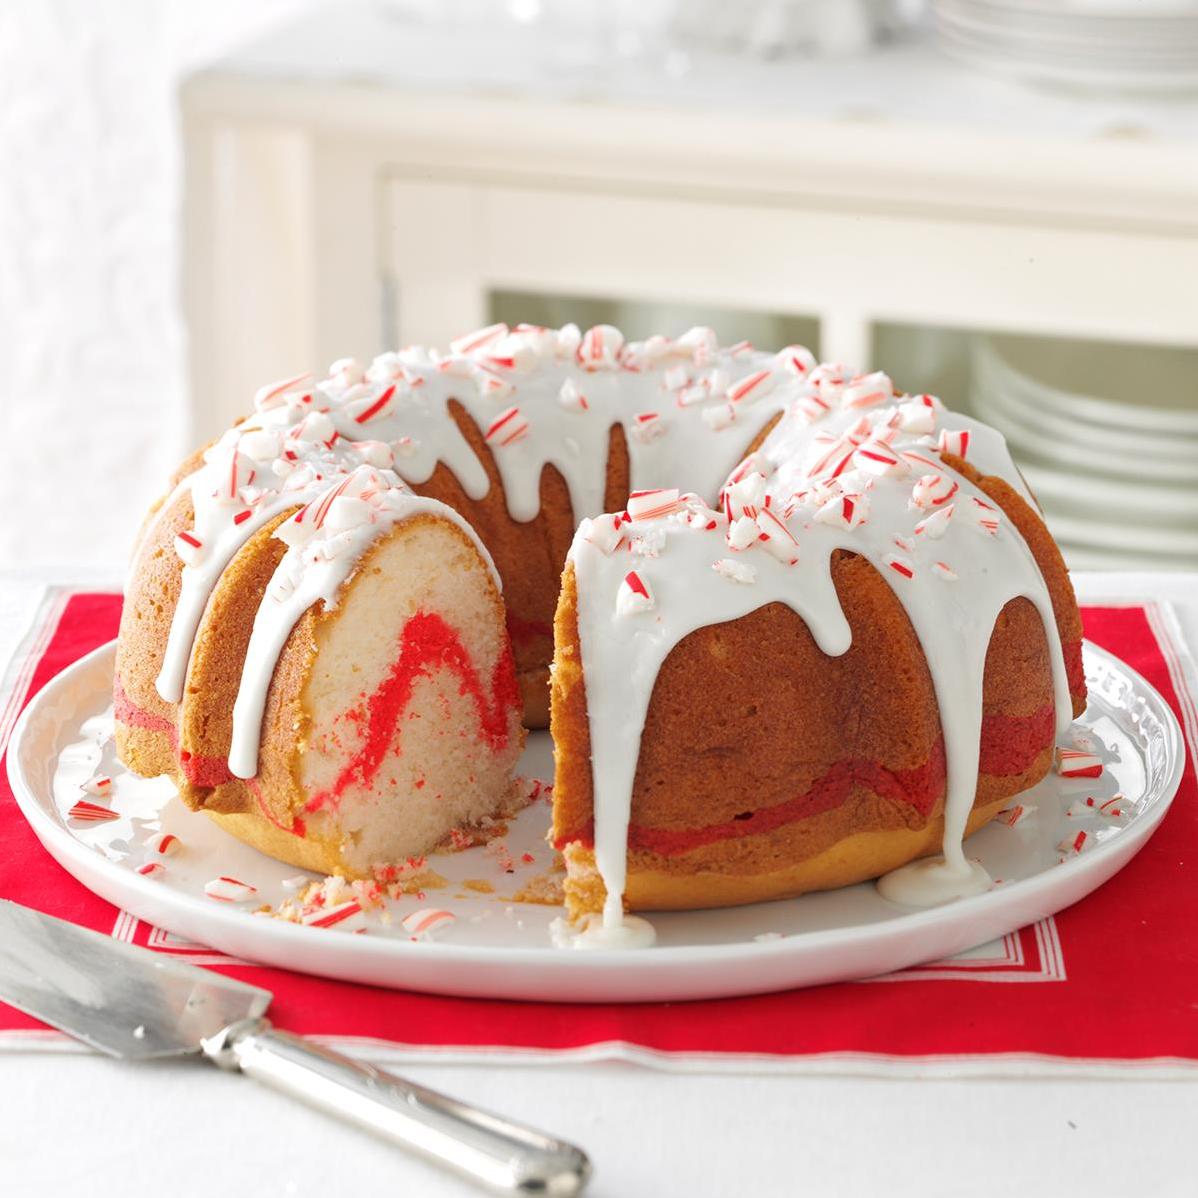  Simple yet elegant, this peppermint pound cake is a must-have for your holiday baking lineup.